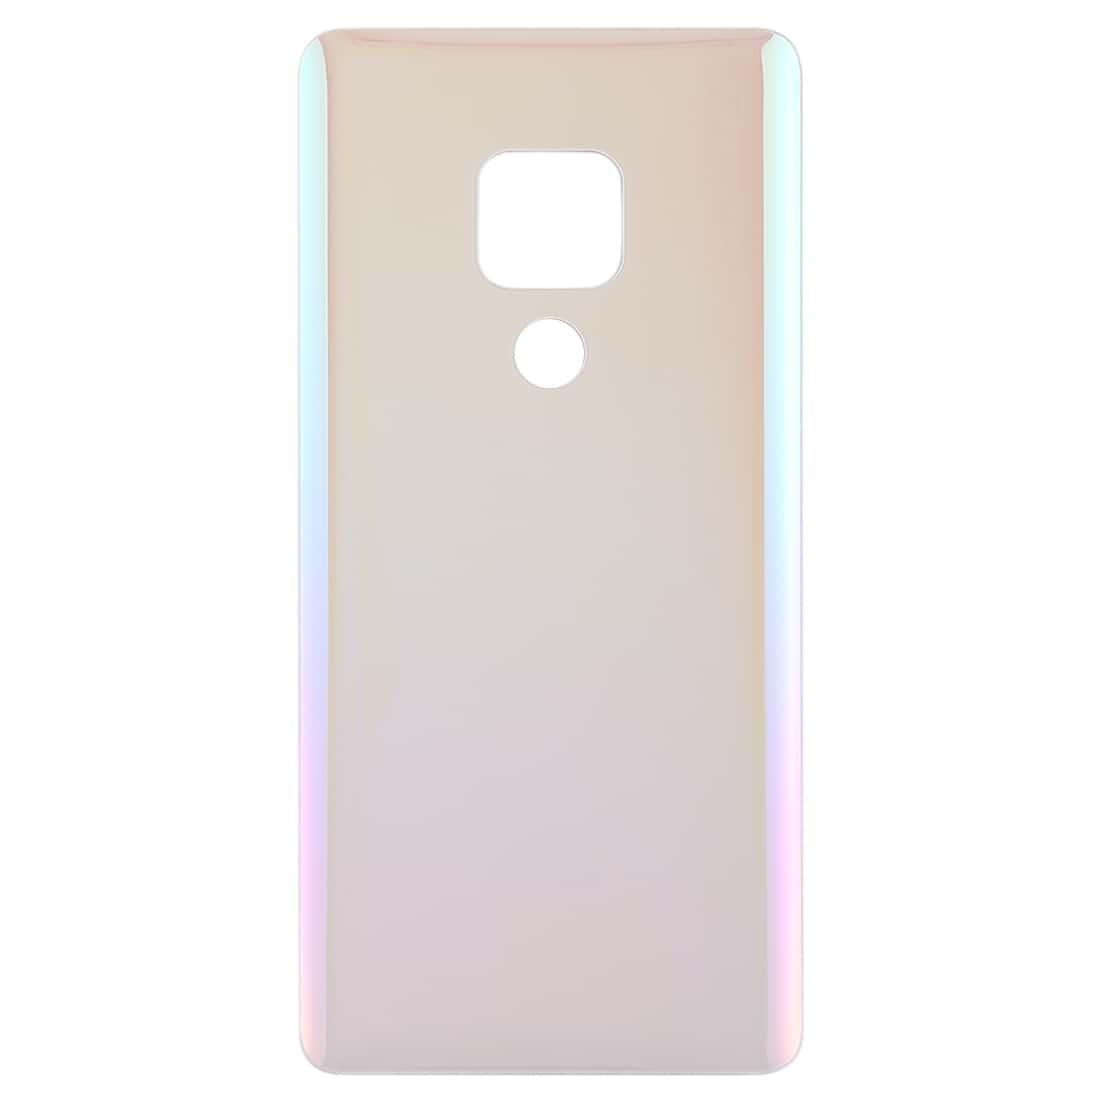 Back Panel Housing Body for Huawei Mate 20 Pink